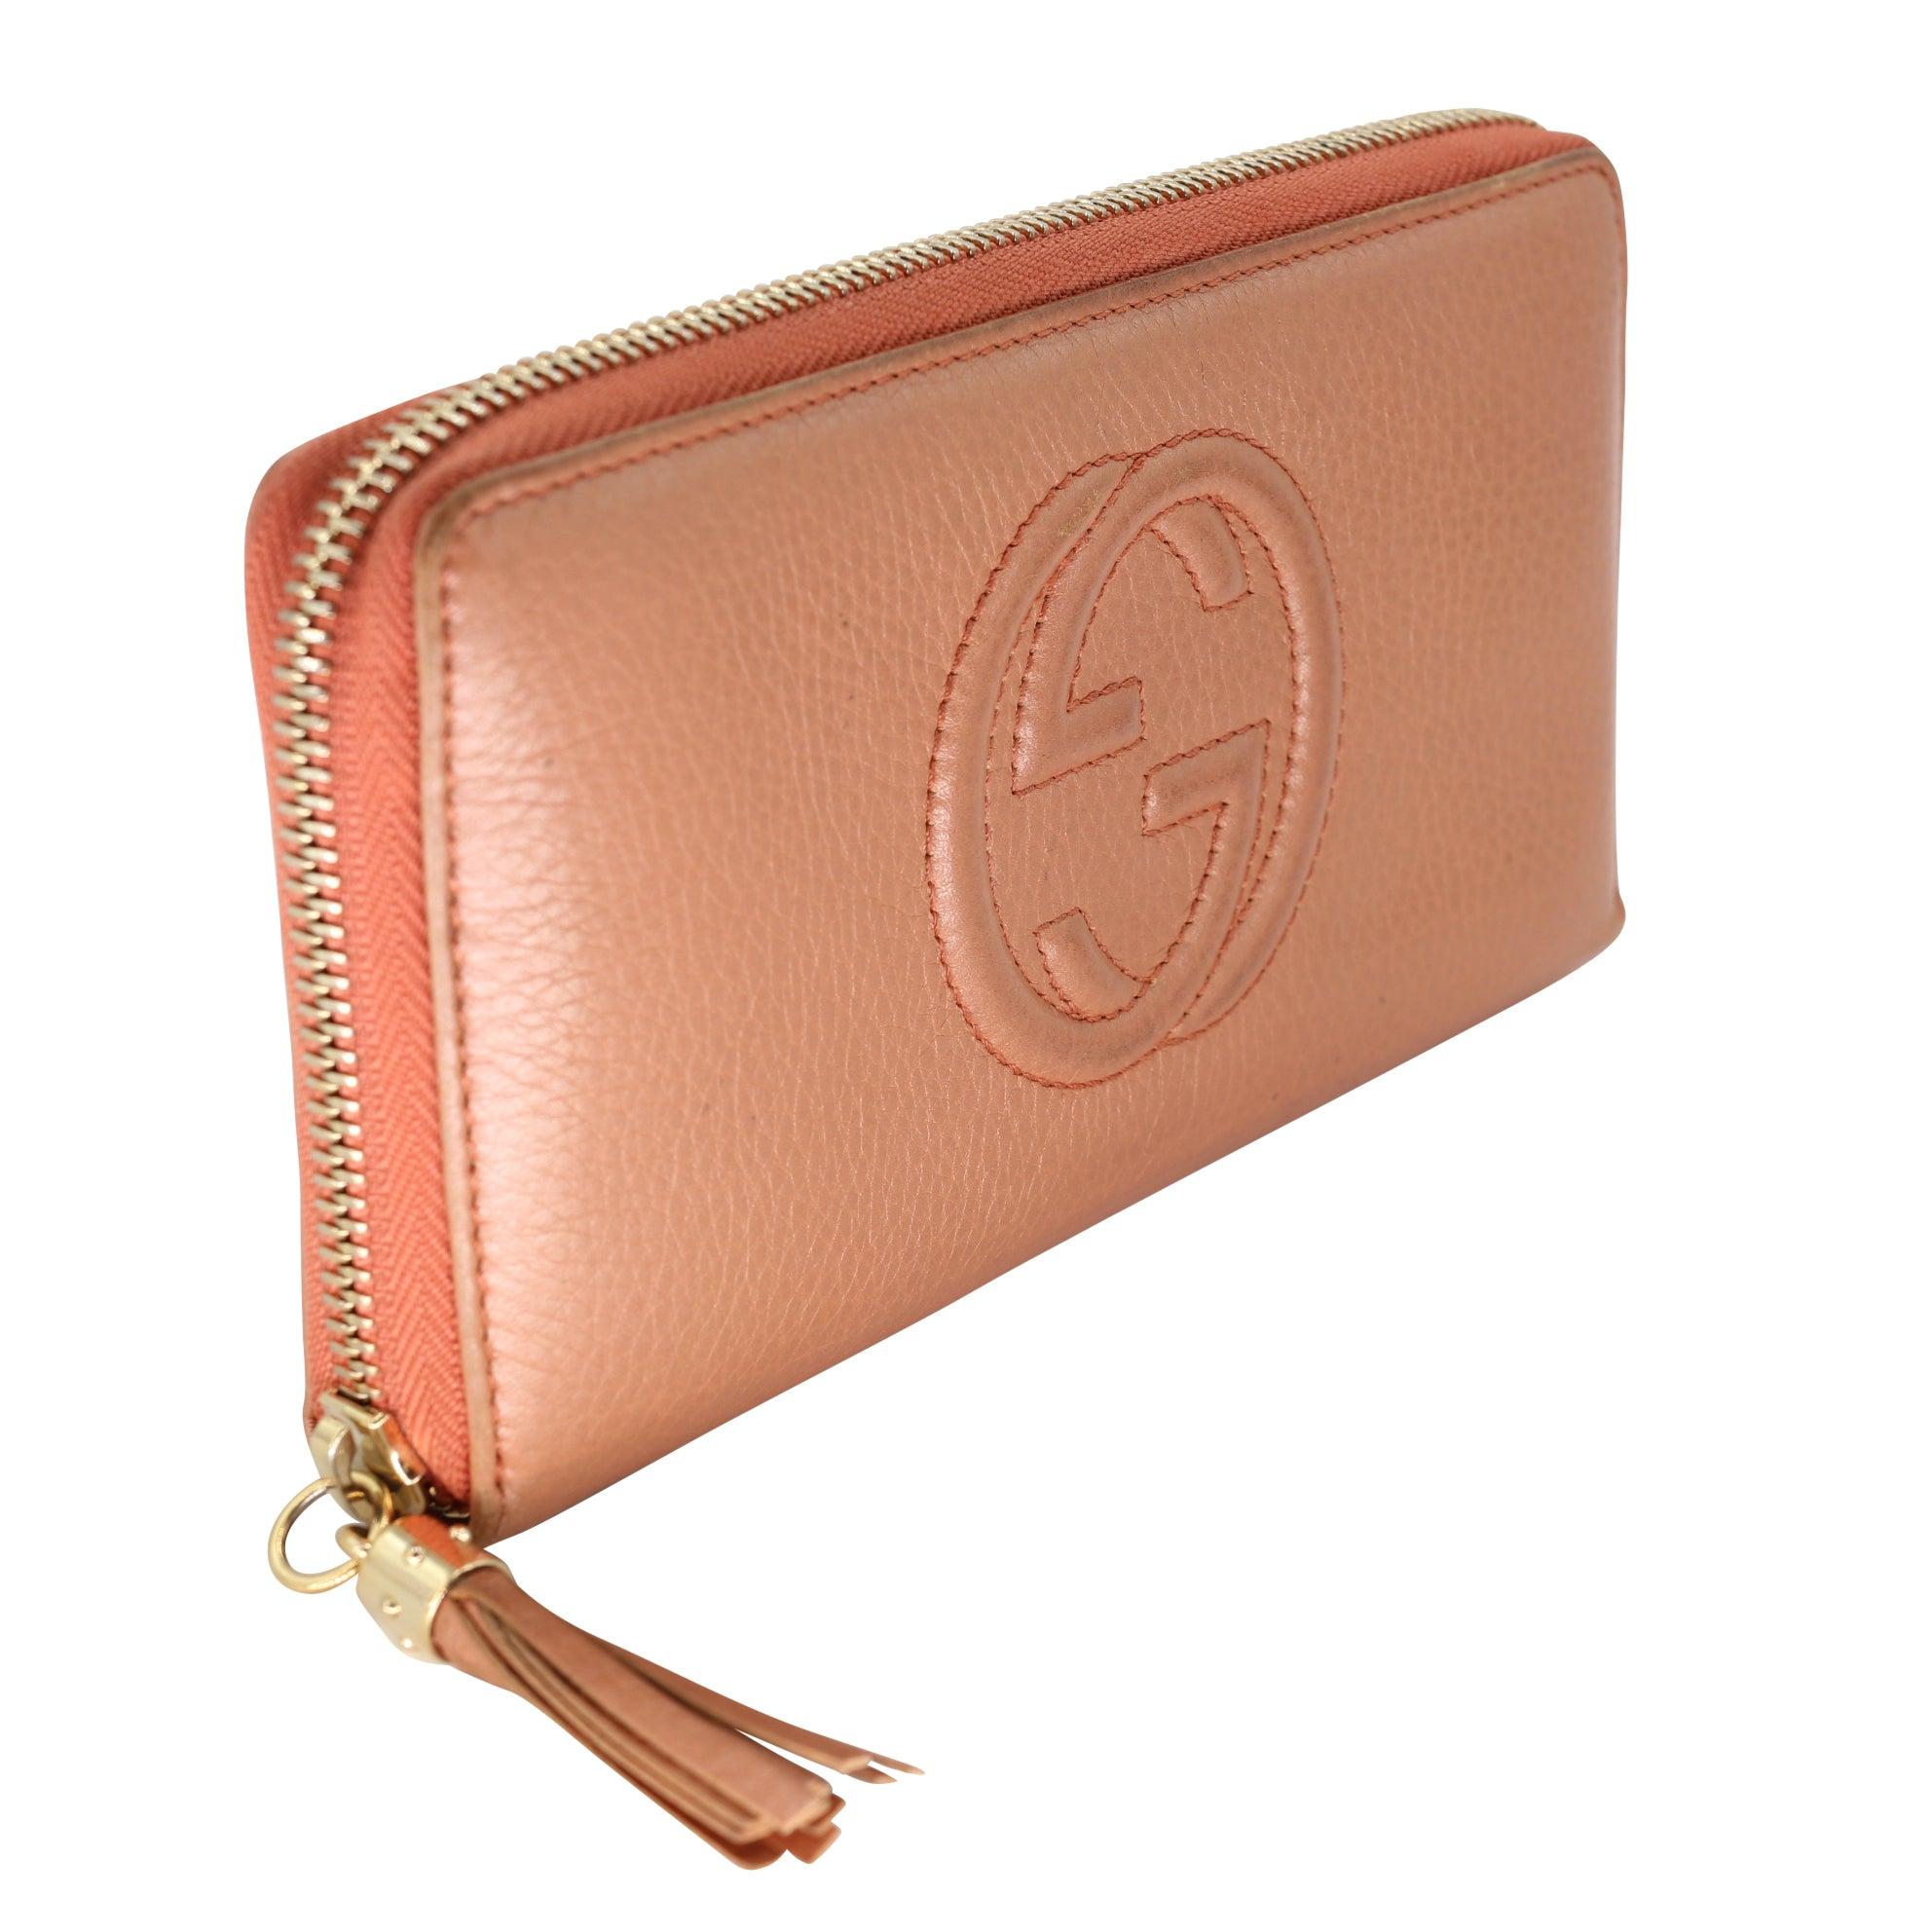 Gucci continues to reinterpret the GG logo with a modern leather, yet classic designs. This wallet features peach the distinctive big GG stitching logo. Long wallet with zip around closure and elegant Tassel zipper. Wallet is in pre-loved condition